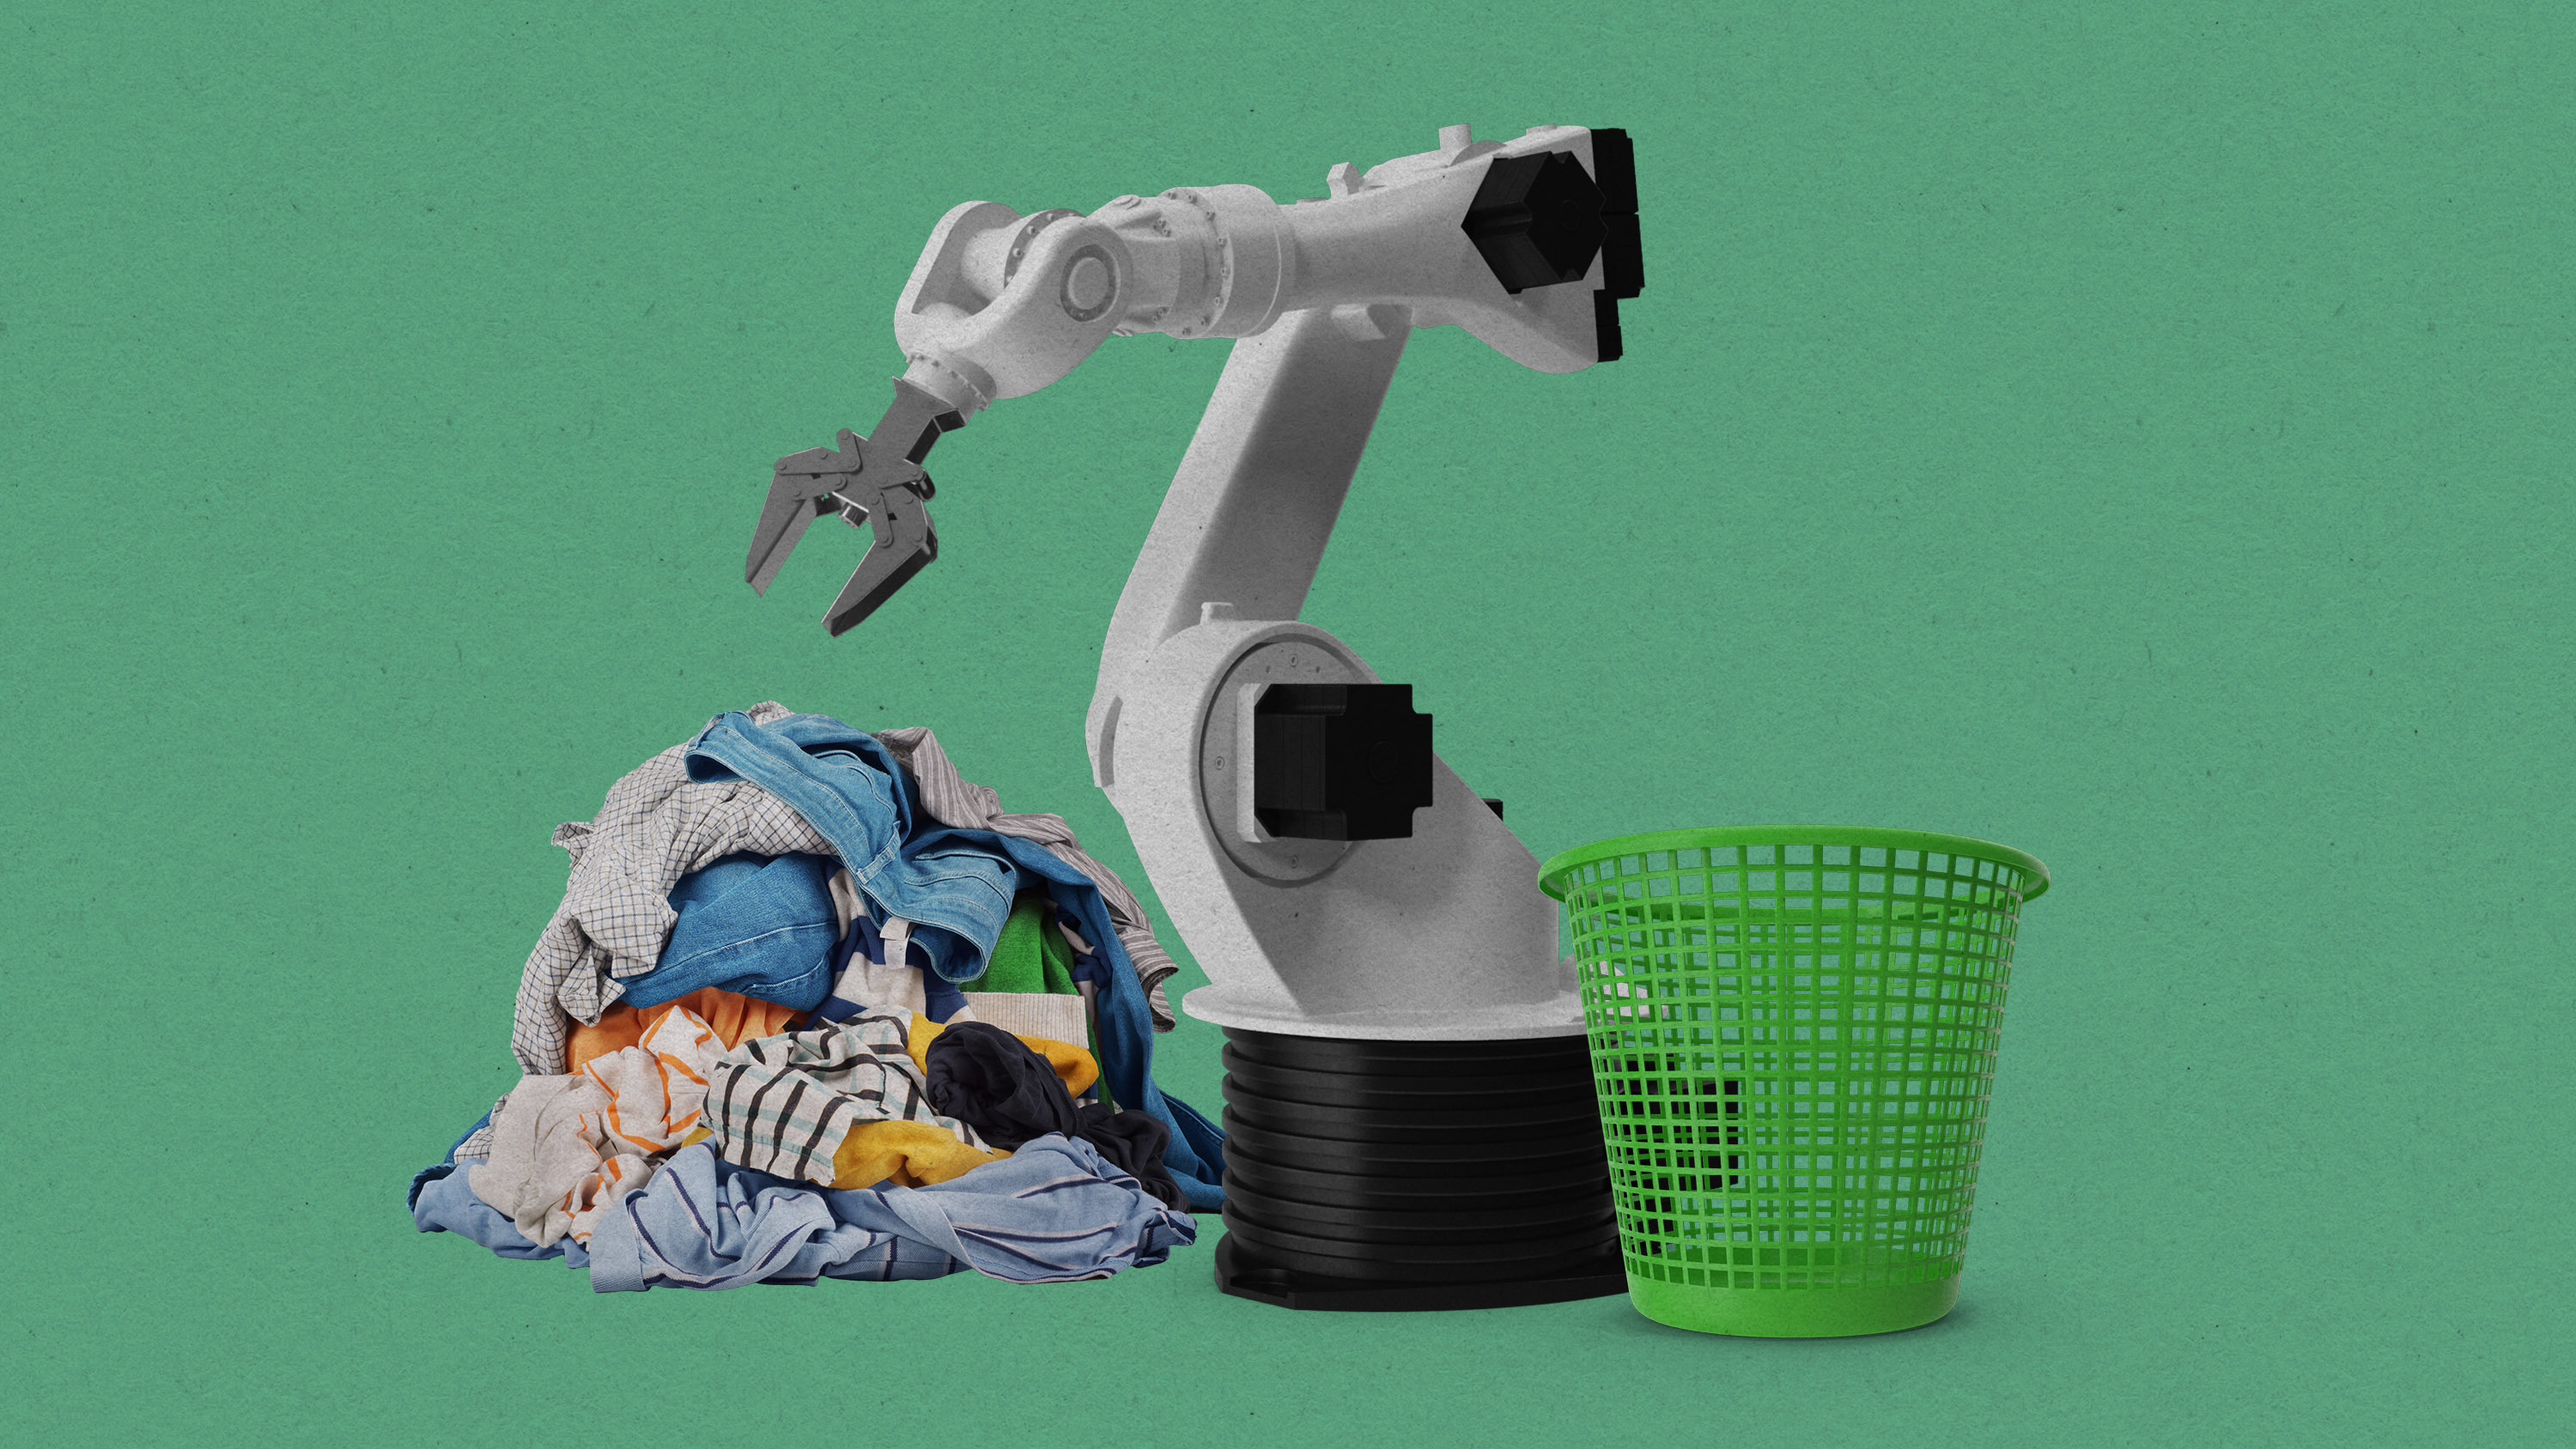 robot arm next to a laundry basket and pile of clothes